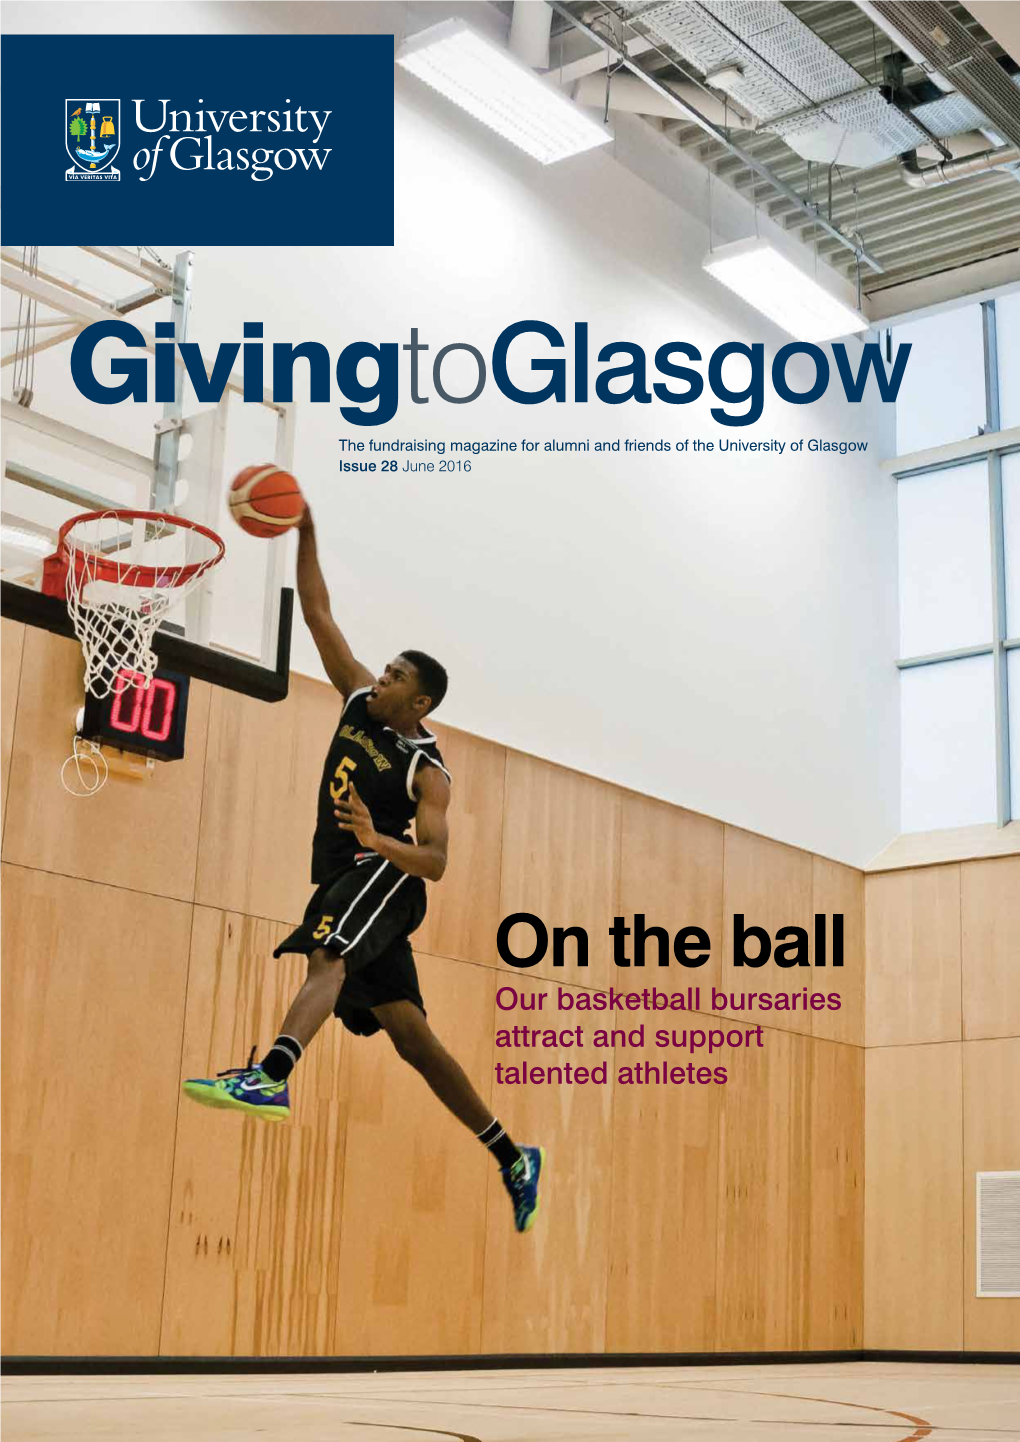 Givingtoglasgow the Fundraising Magazine for Alumni and Friends of the University of Glasgow Issue 28 June 2016